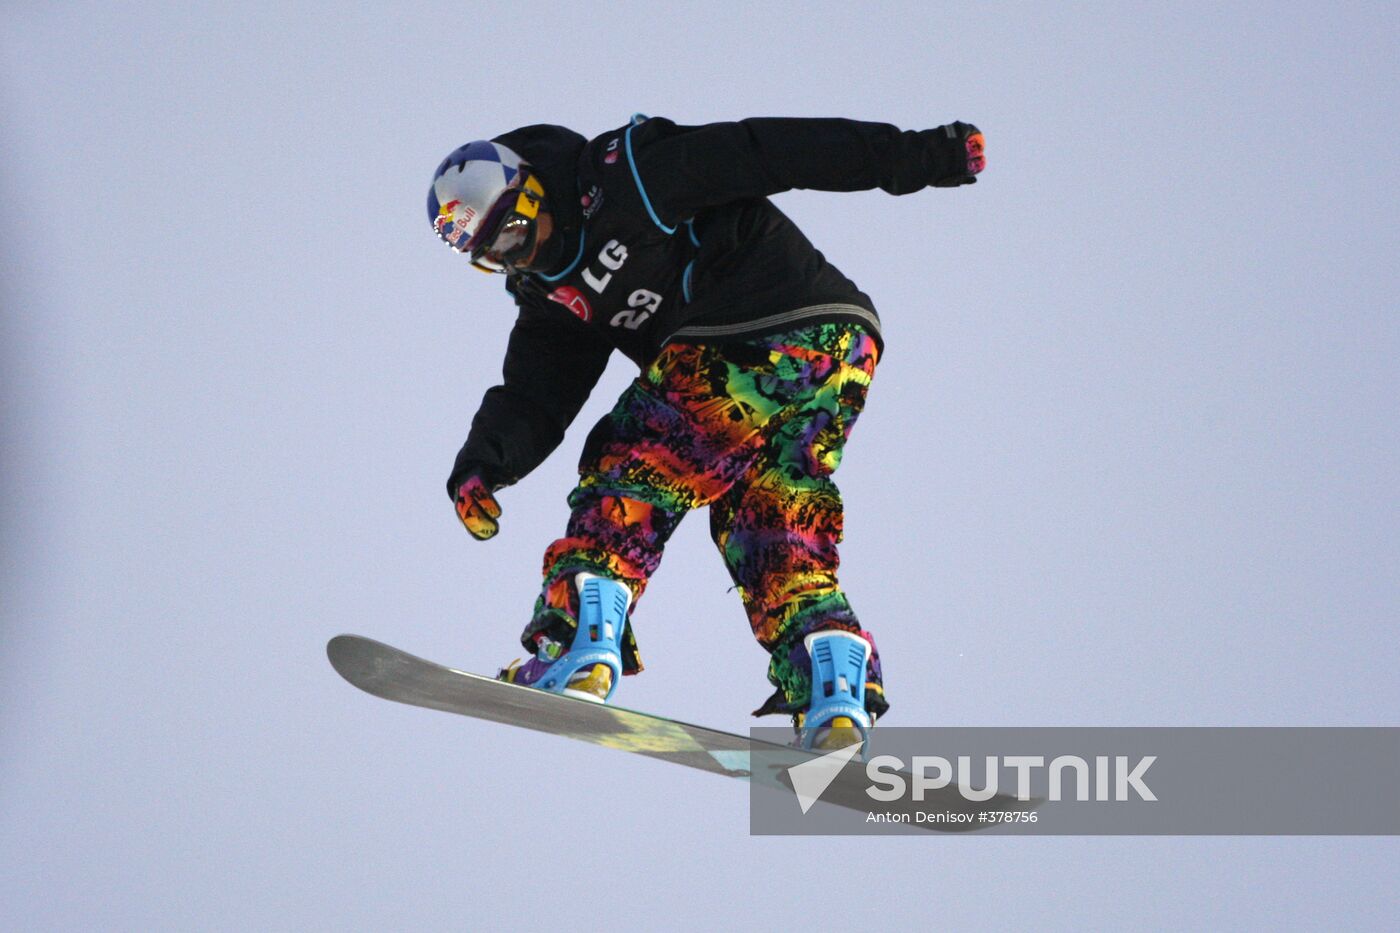 Big Air World Cup finals held in Moscow